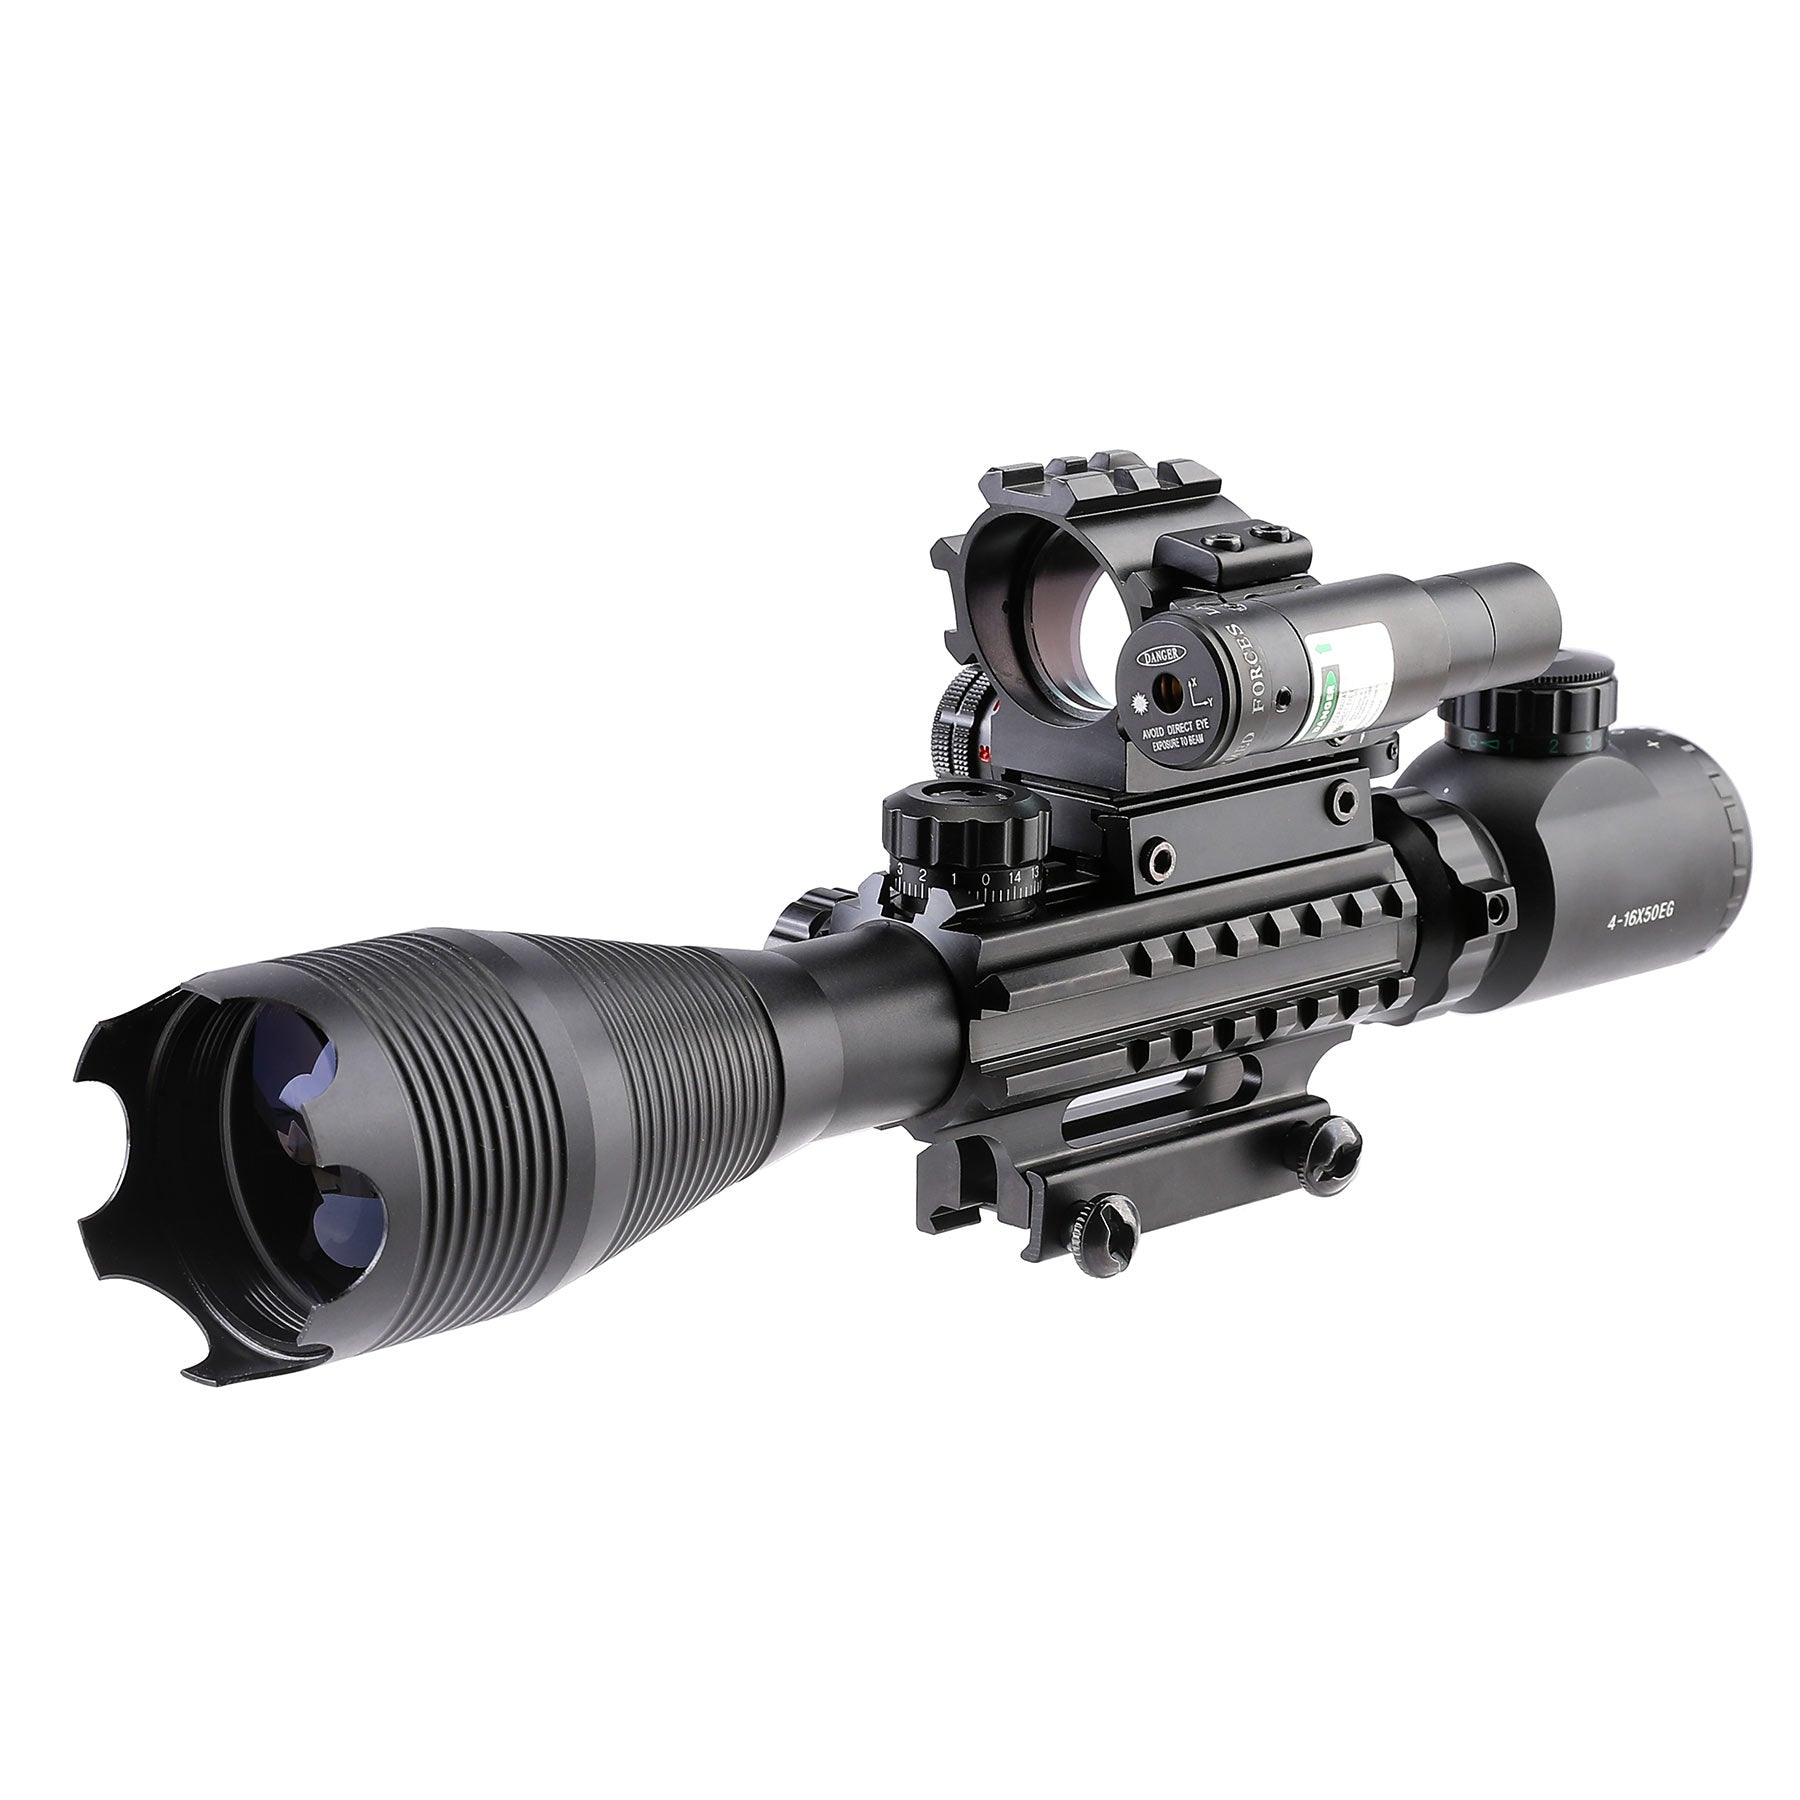 ar scope; thermal scopes for rifles; reflex sight; holosun red dot; ar accessories